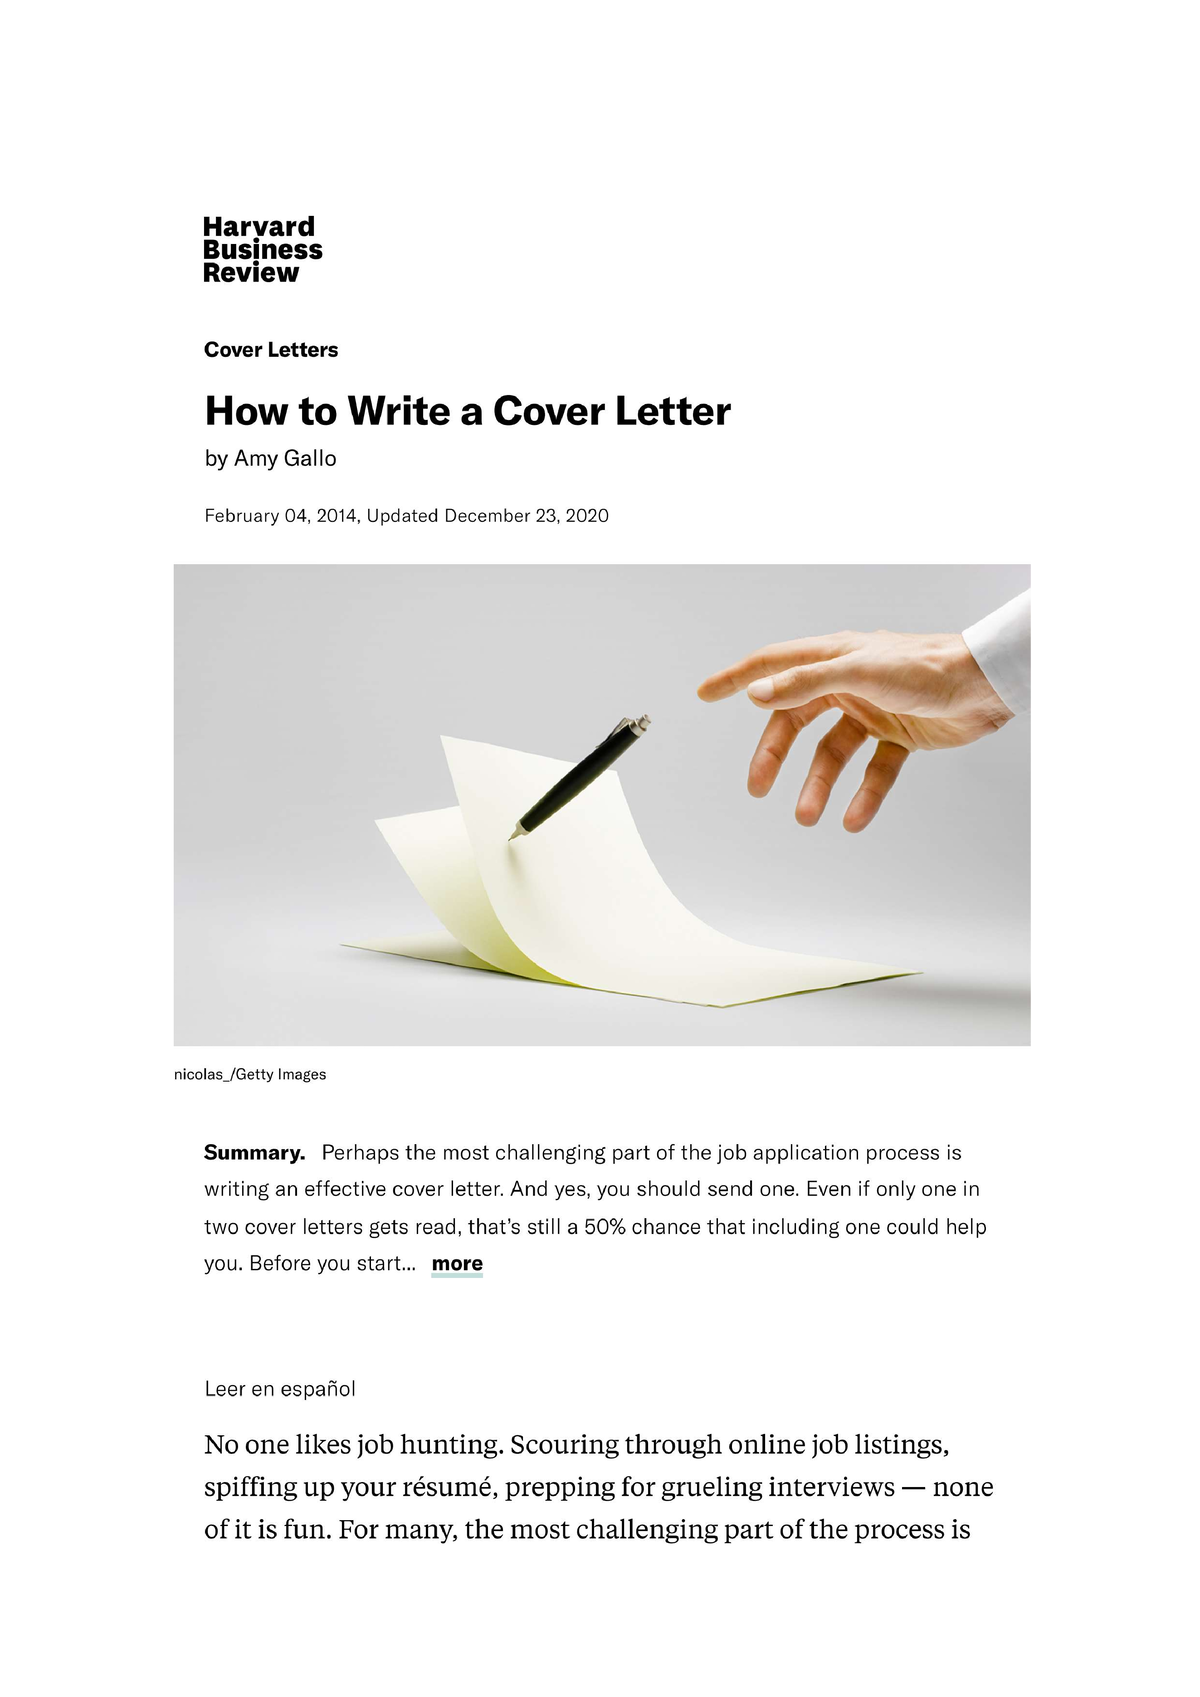 how to write a cover letter hbr